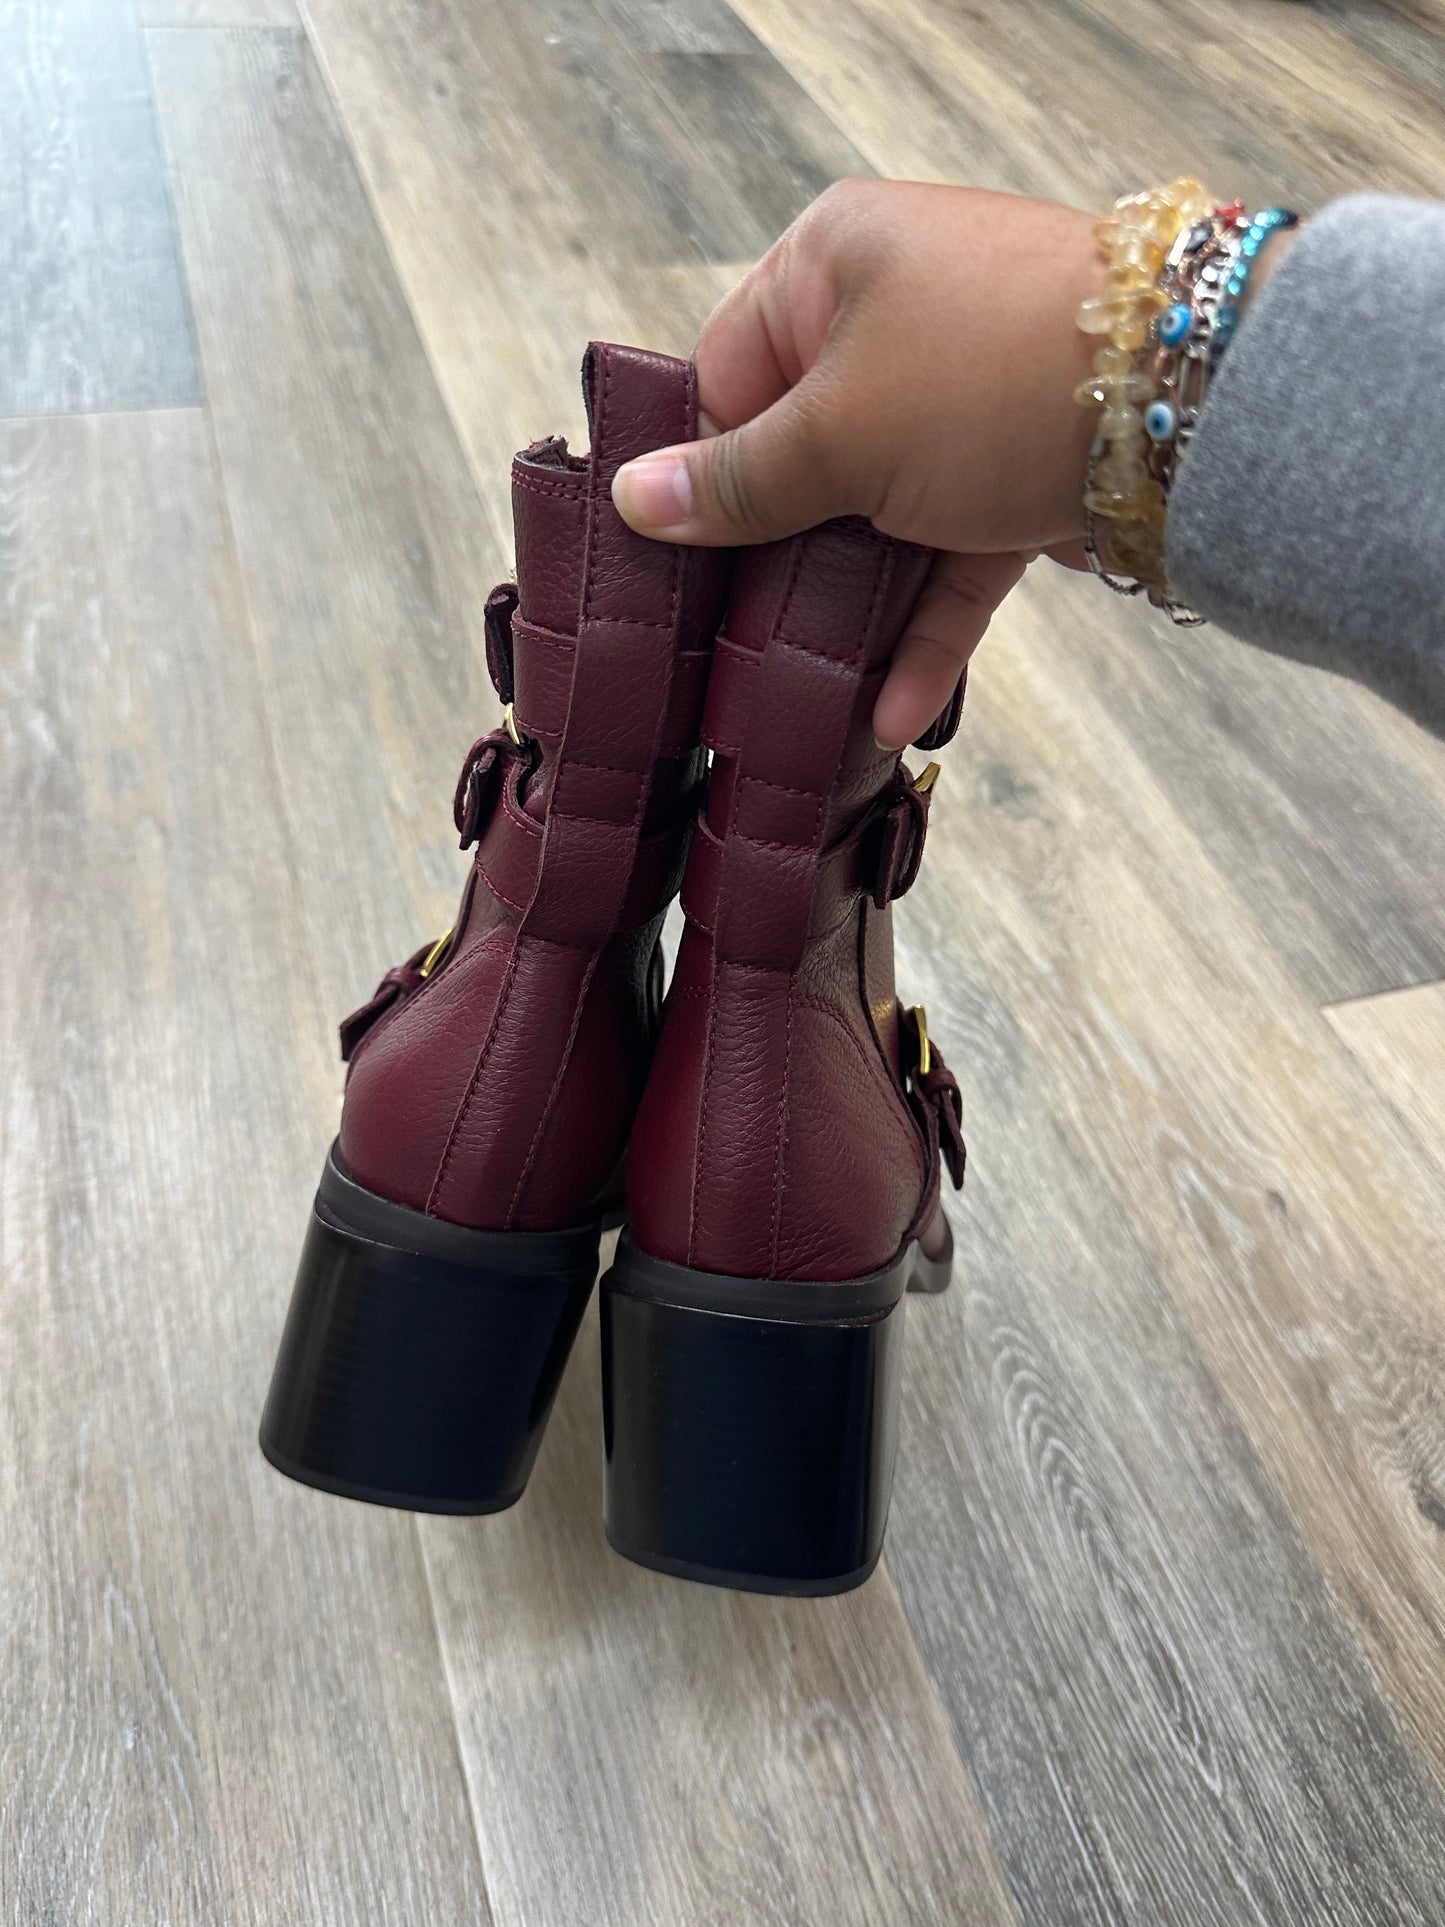 Red Boots Ankle Heels Vince Camuto, Size 9.5